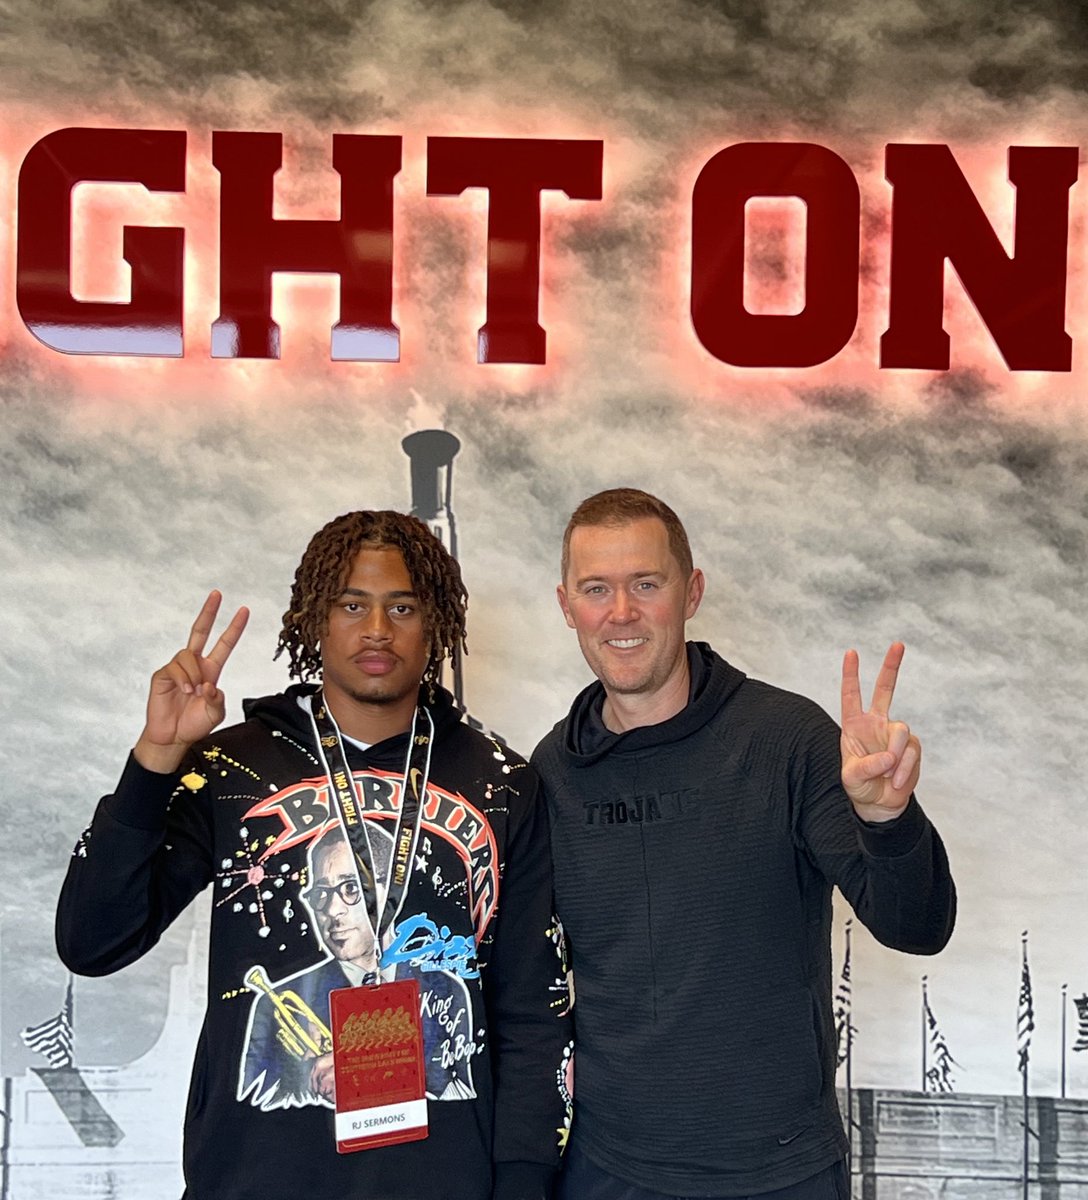 Thank you @uscfb @LincolnRiley @Doug_Belk for a great time today. Enjoyed watching the Spring Game and your hospitality. #FightOn